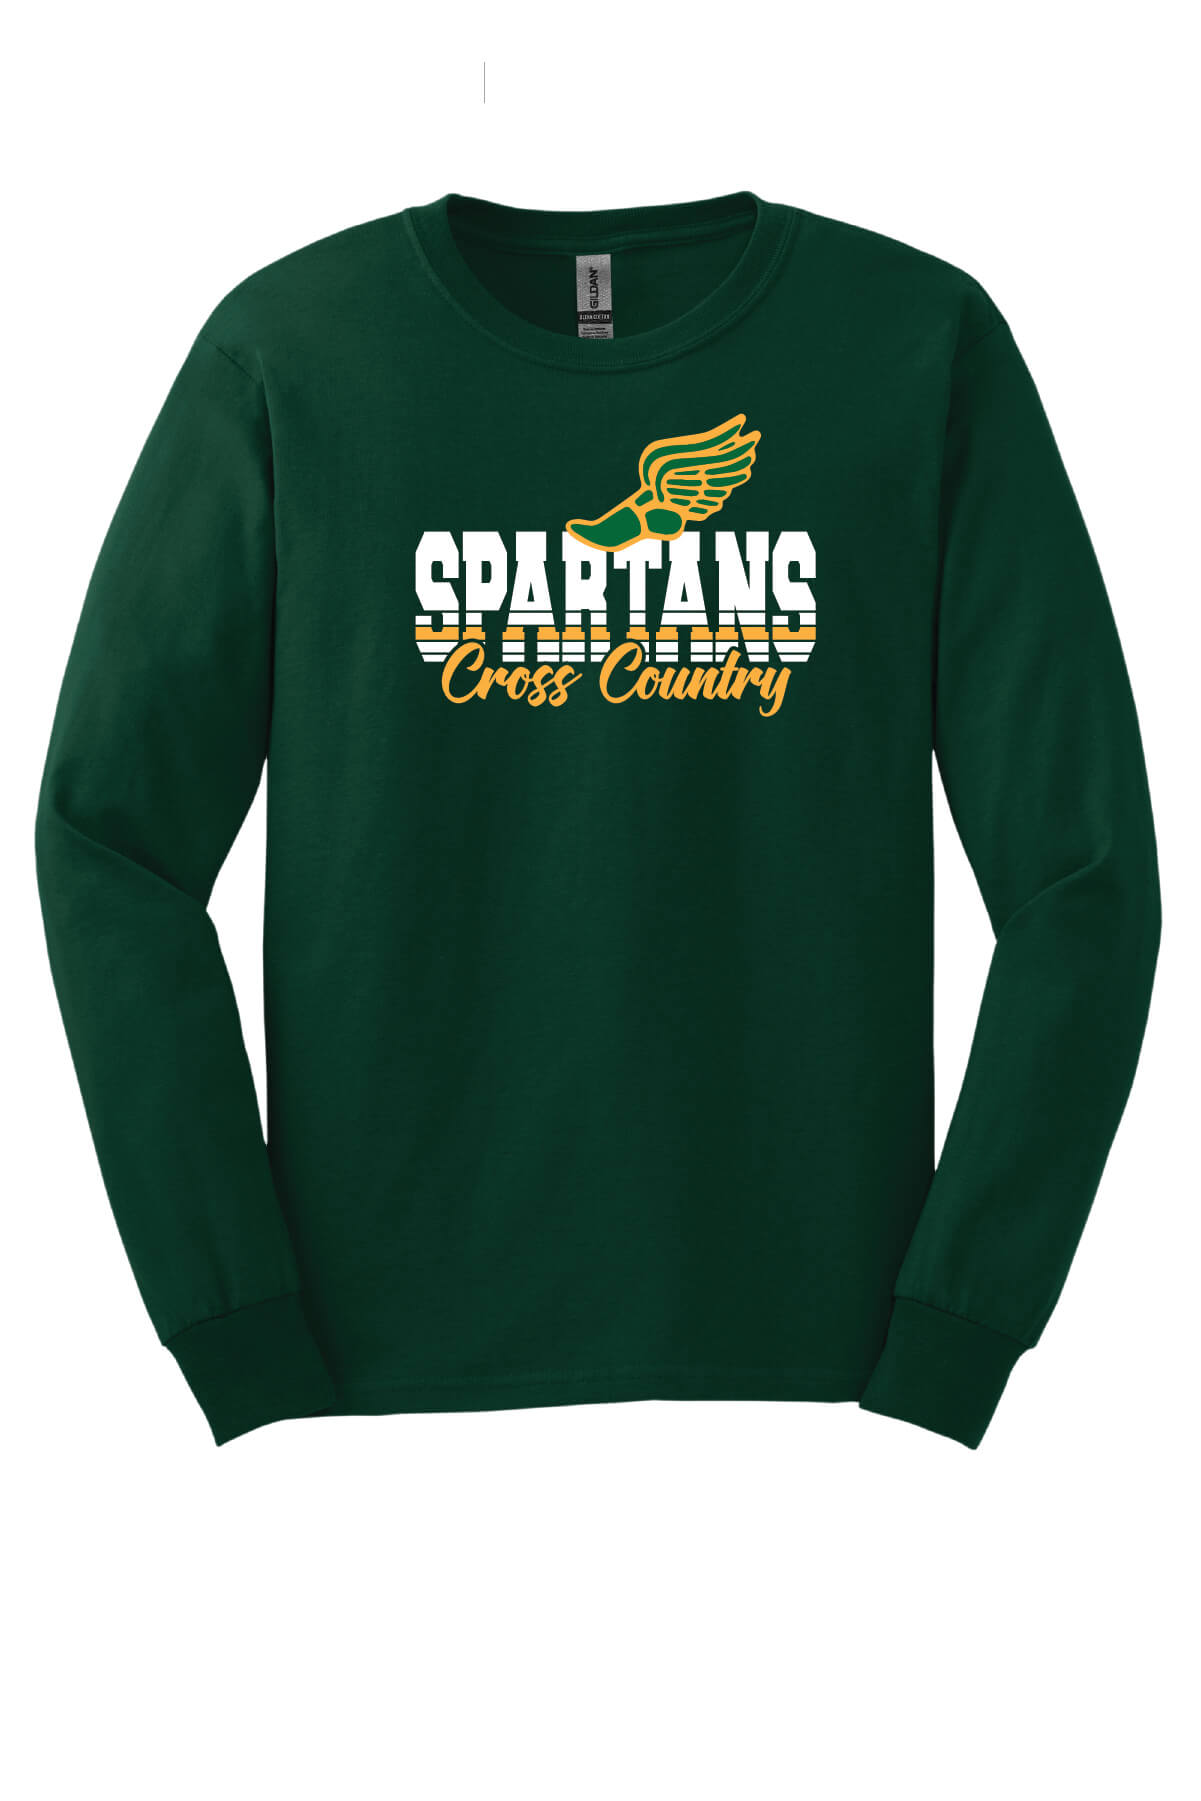 Spartans Cross Country Long Sleeve T-Shirt green